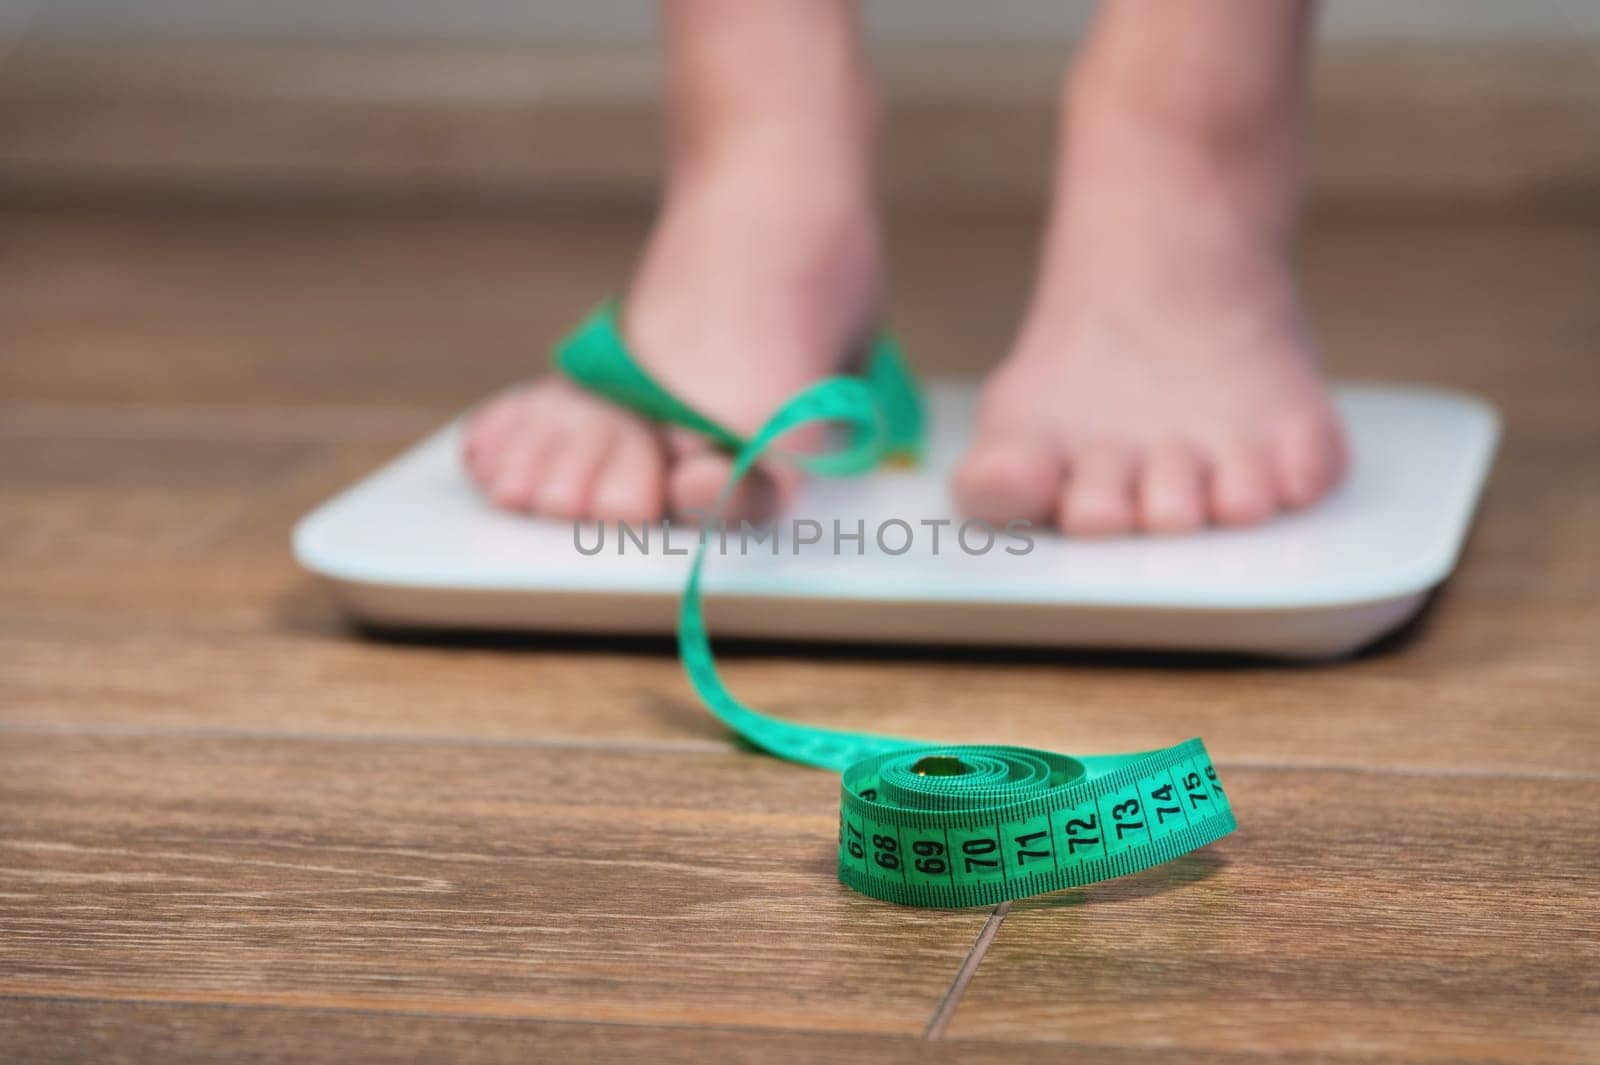 A girl with swollen feet uses a scale next to a measuring tape on a wooden floor. Unrecognizable woman weighing herself.